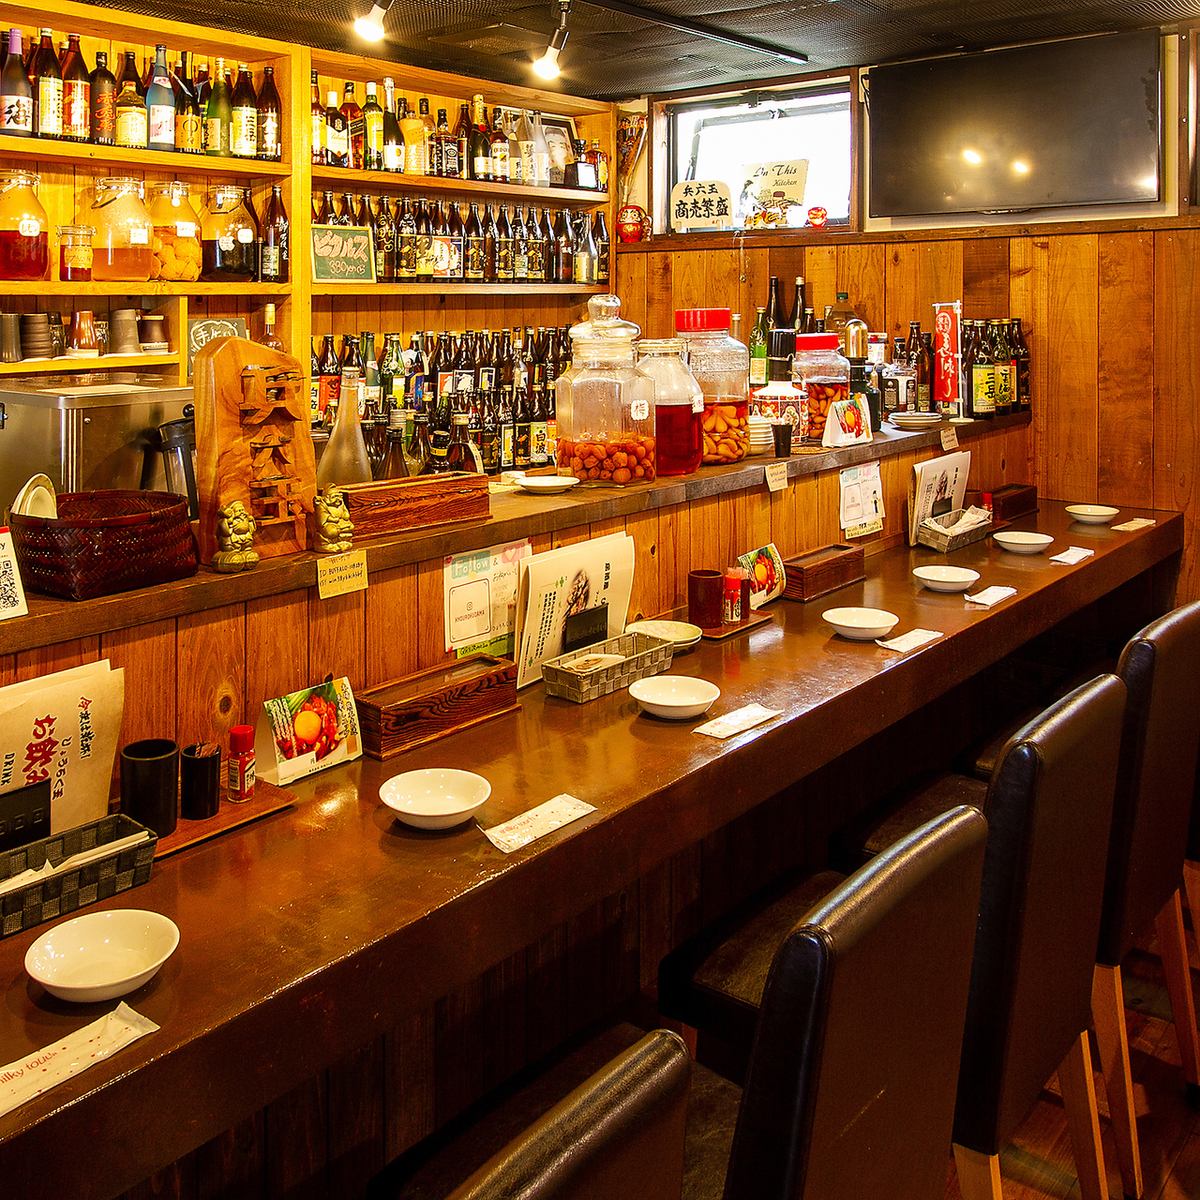 We also have counter seats where you can enjoy your meal alone!